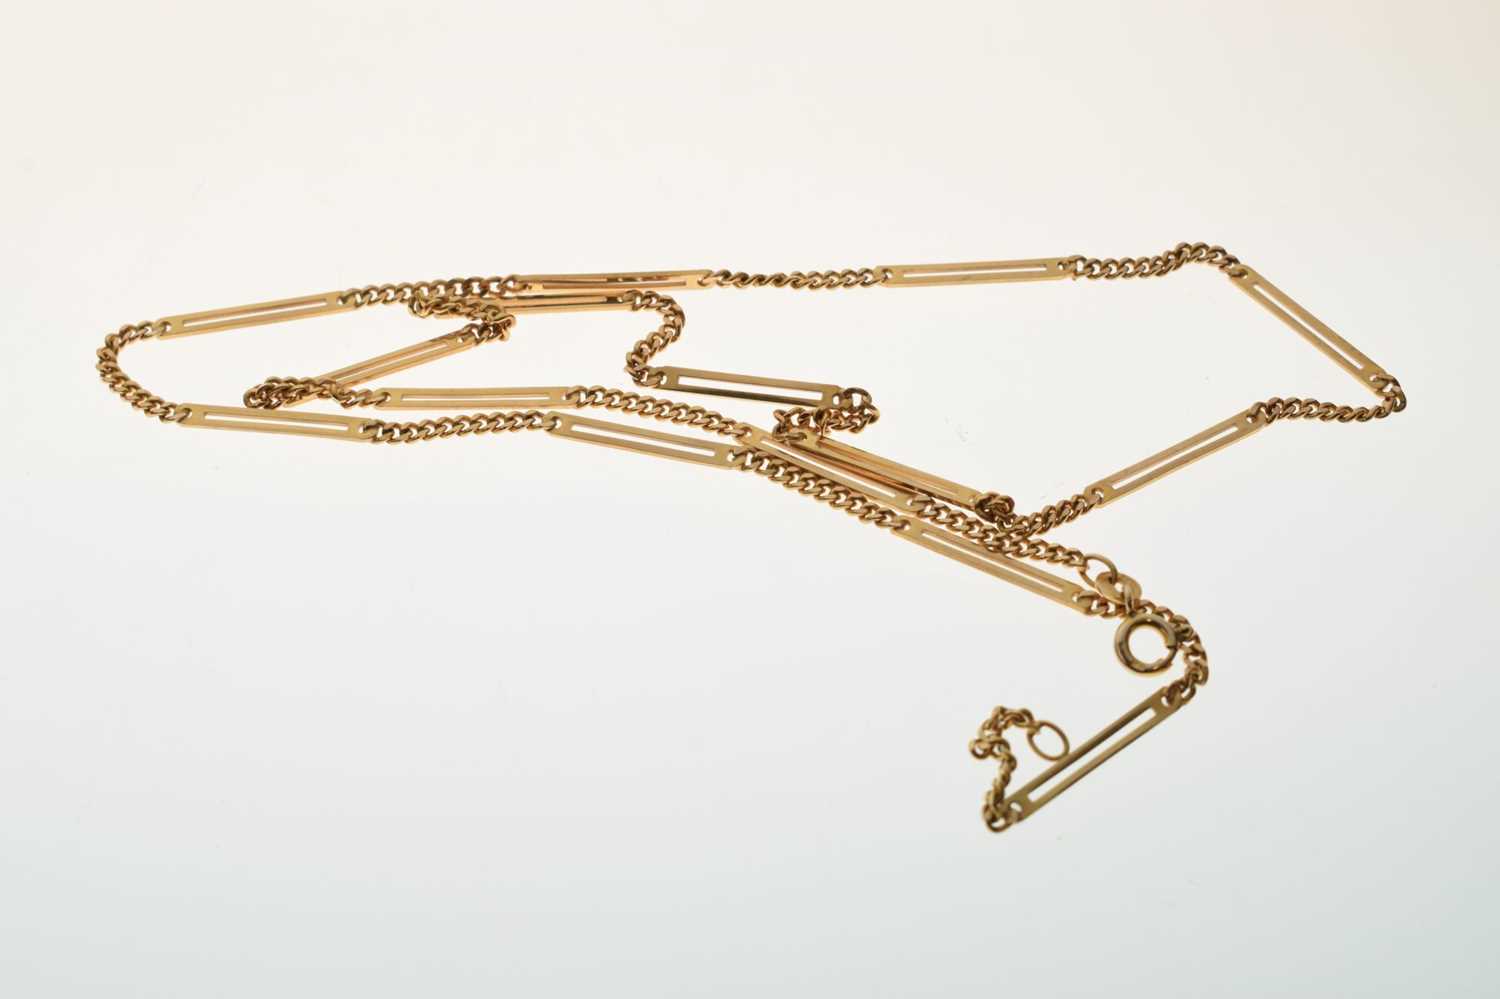 9ct gold trombone link necklace - Image 3 of 6